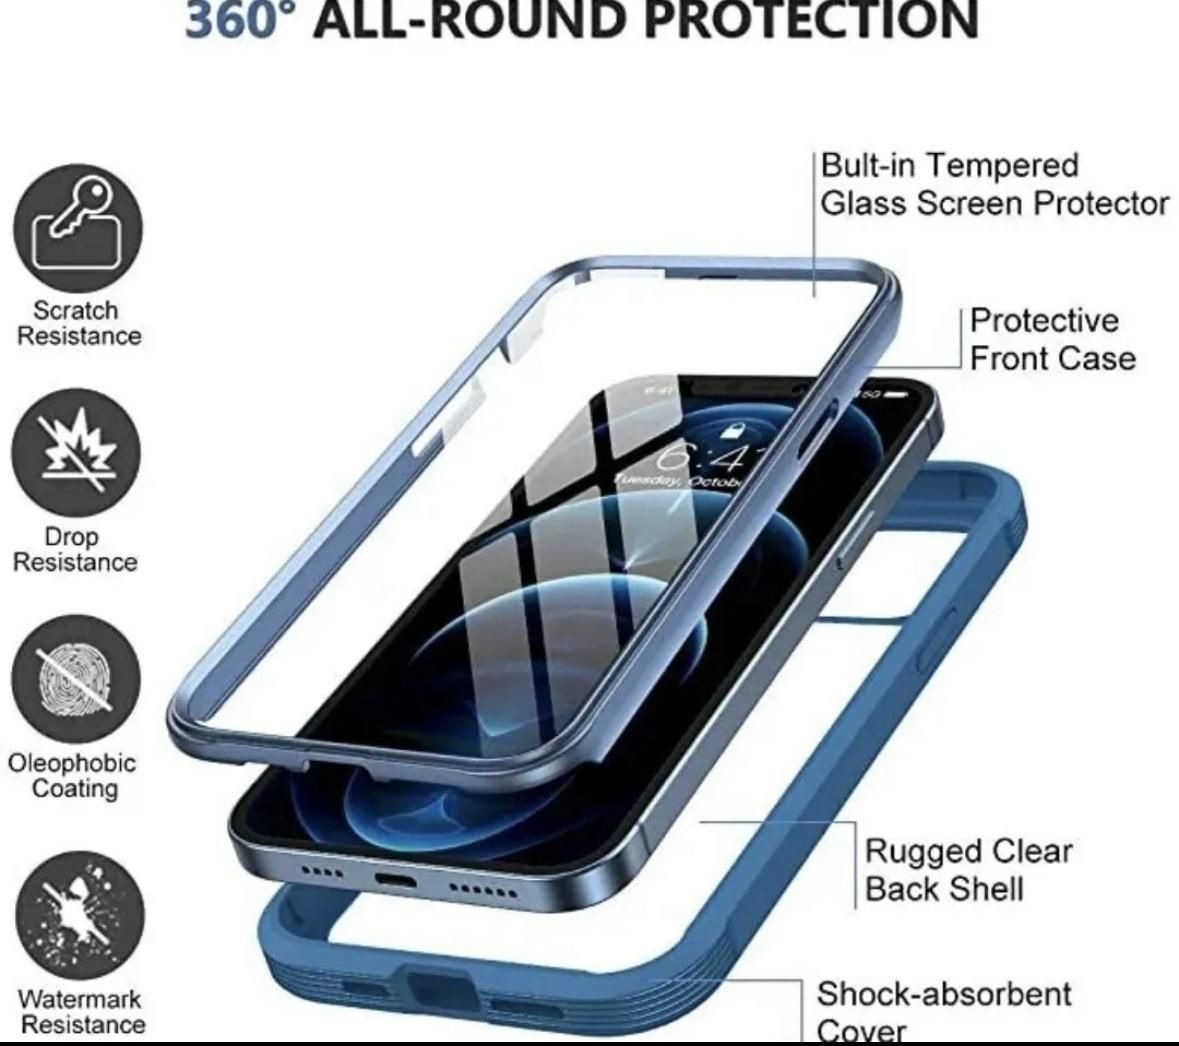 etui Miracase Glass do iPhone’a 12 Pro Max 6,7